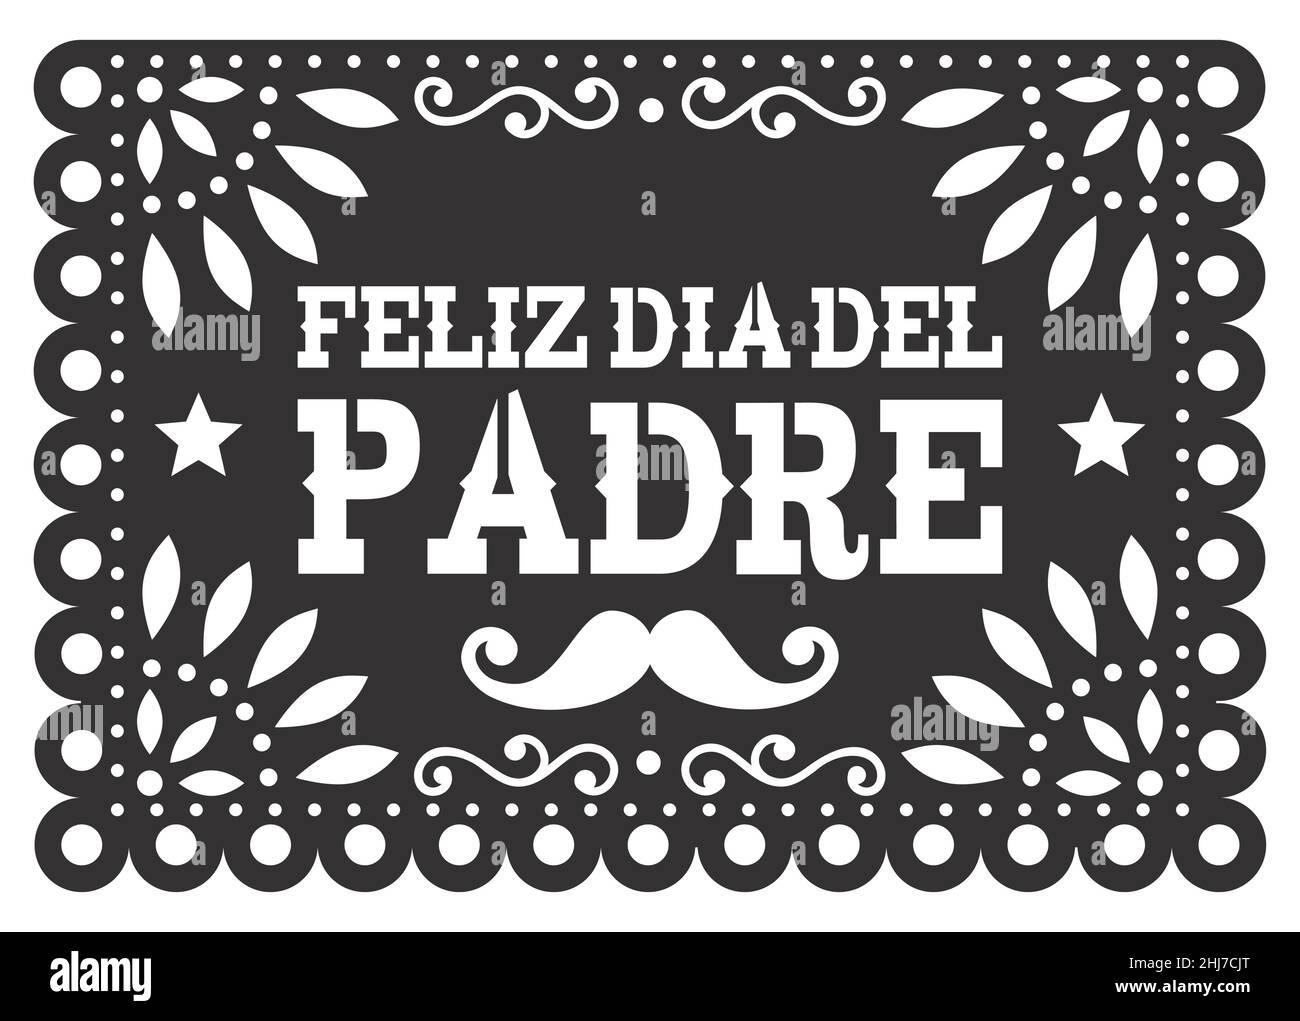 Papel Picado Feliz dia del Padre - Happy Father's Day vector greeting card, Mexican design with moustache Stock Vector